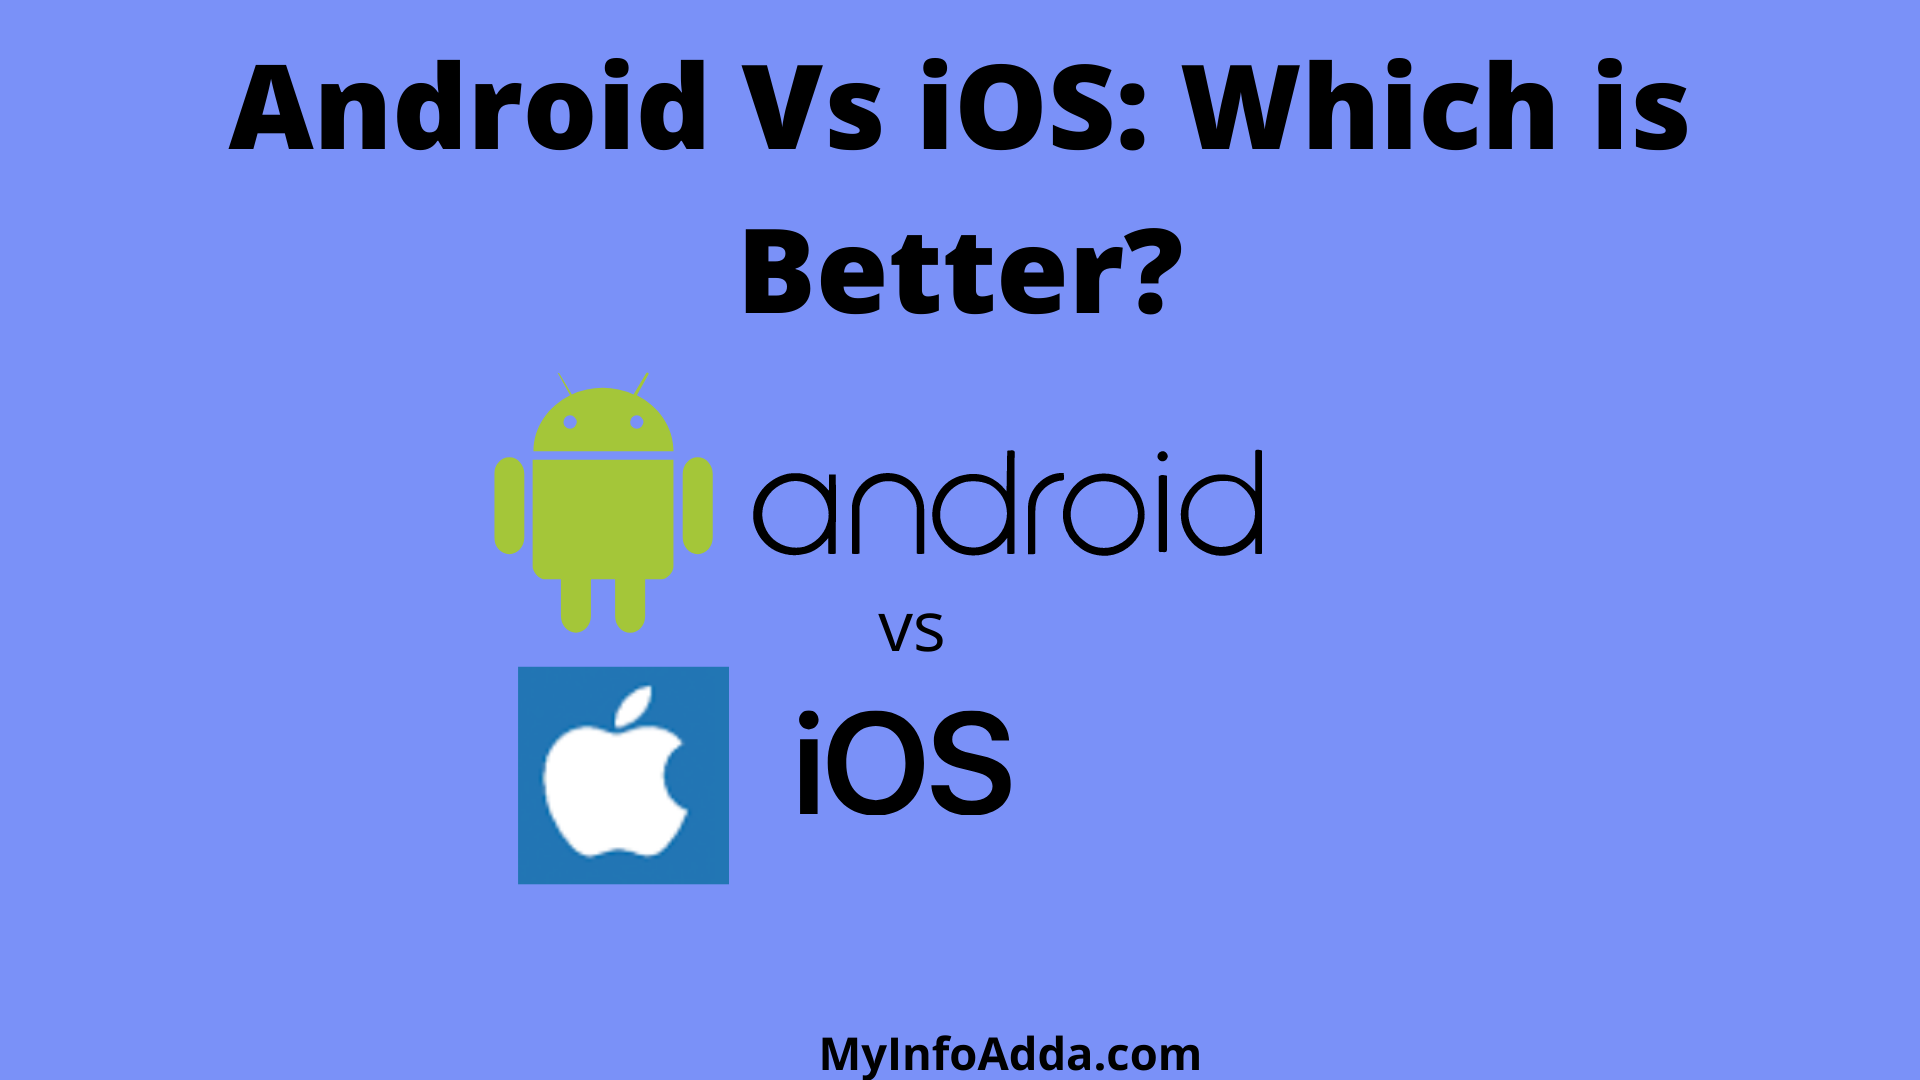 Android Vs iOS: Which is Better?